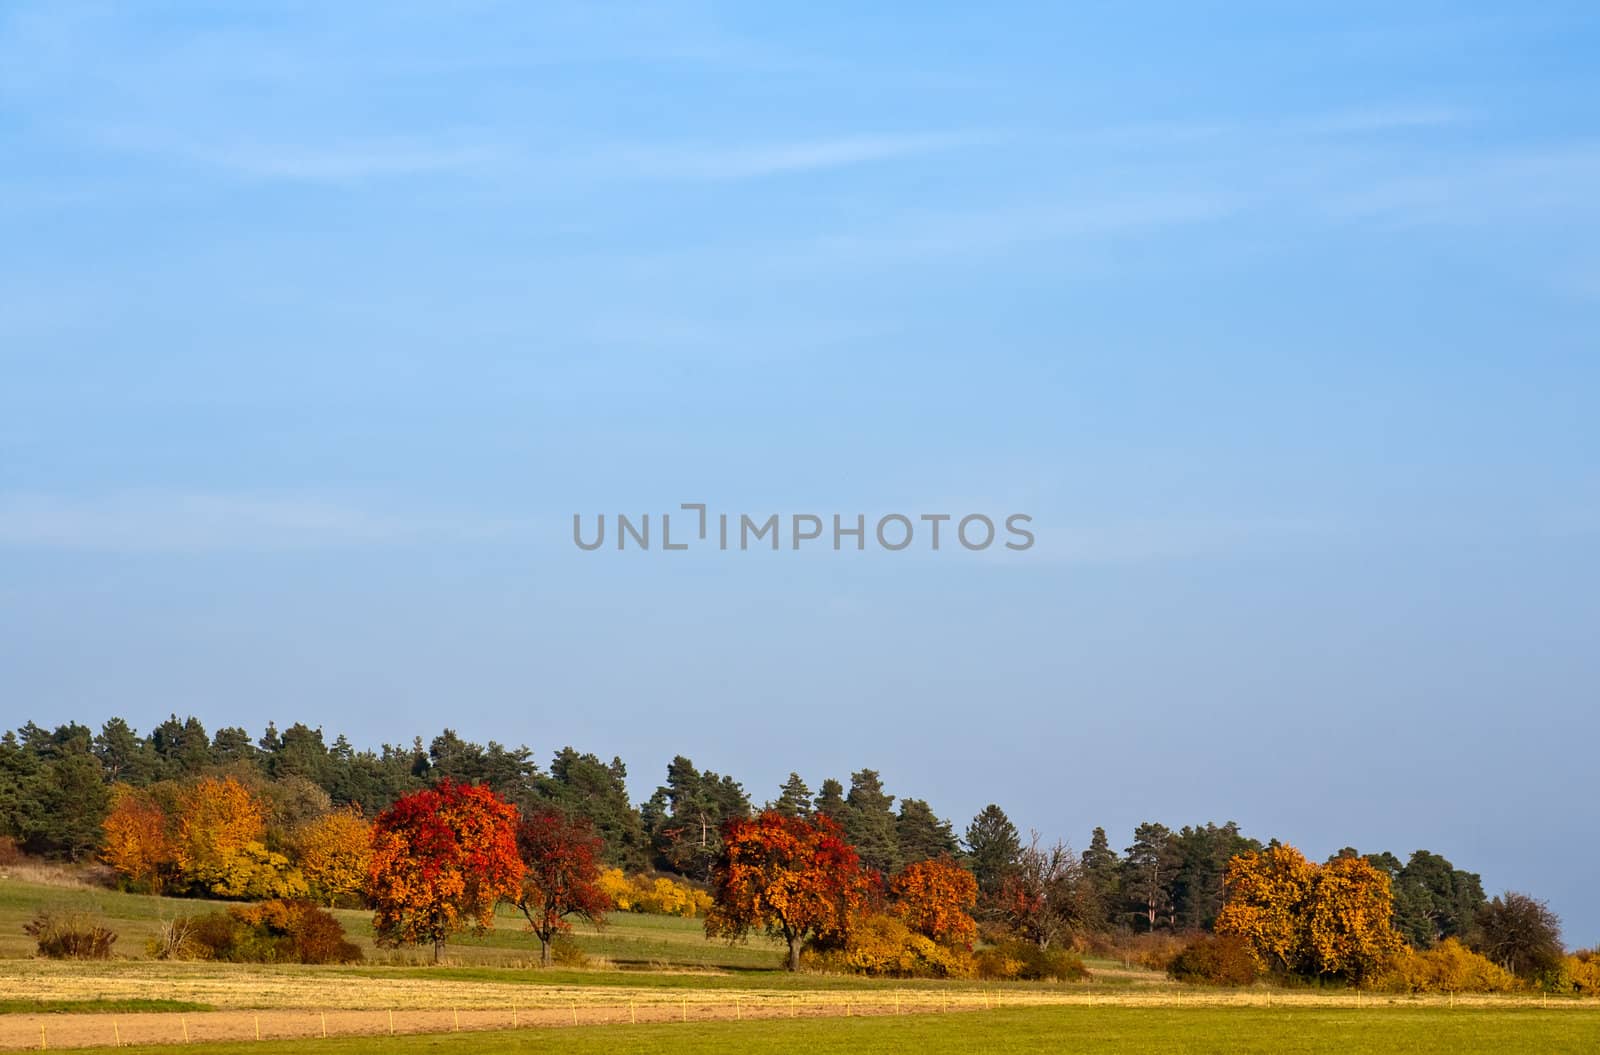 Autumn Scenery by Ragnar